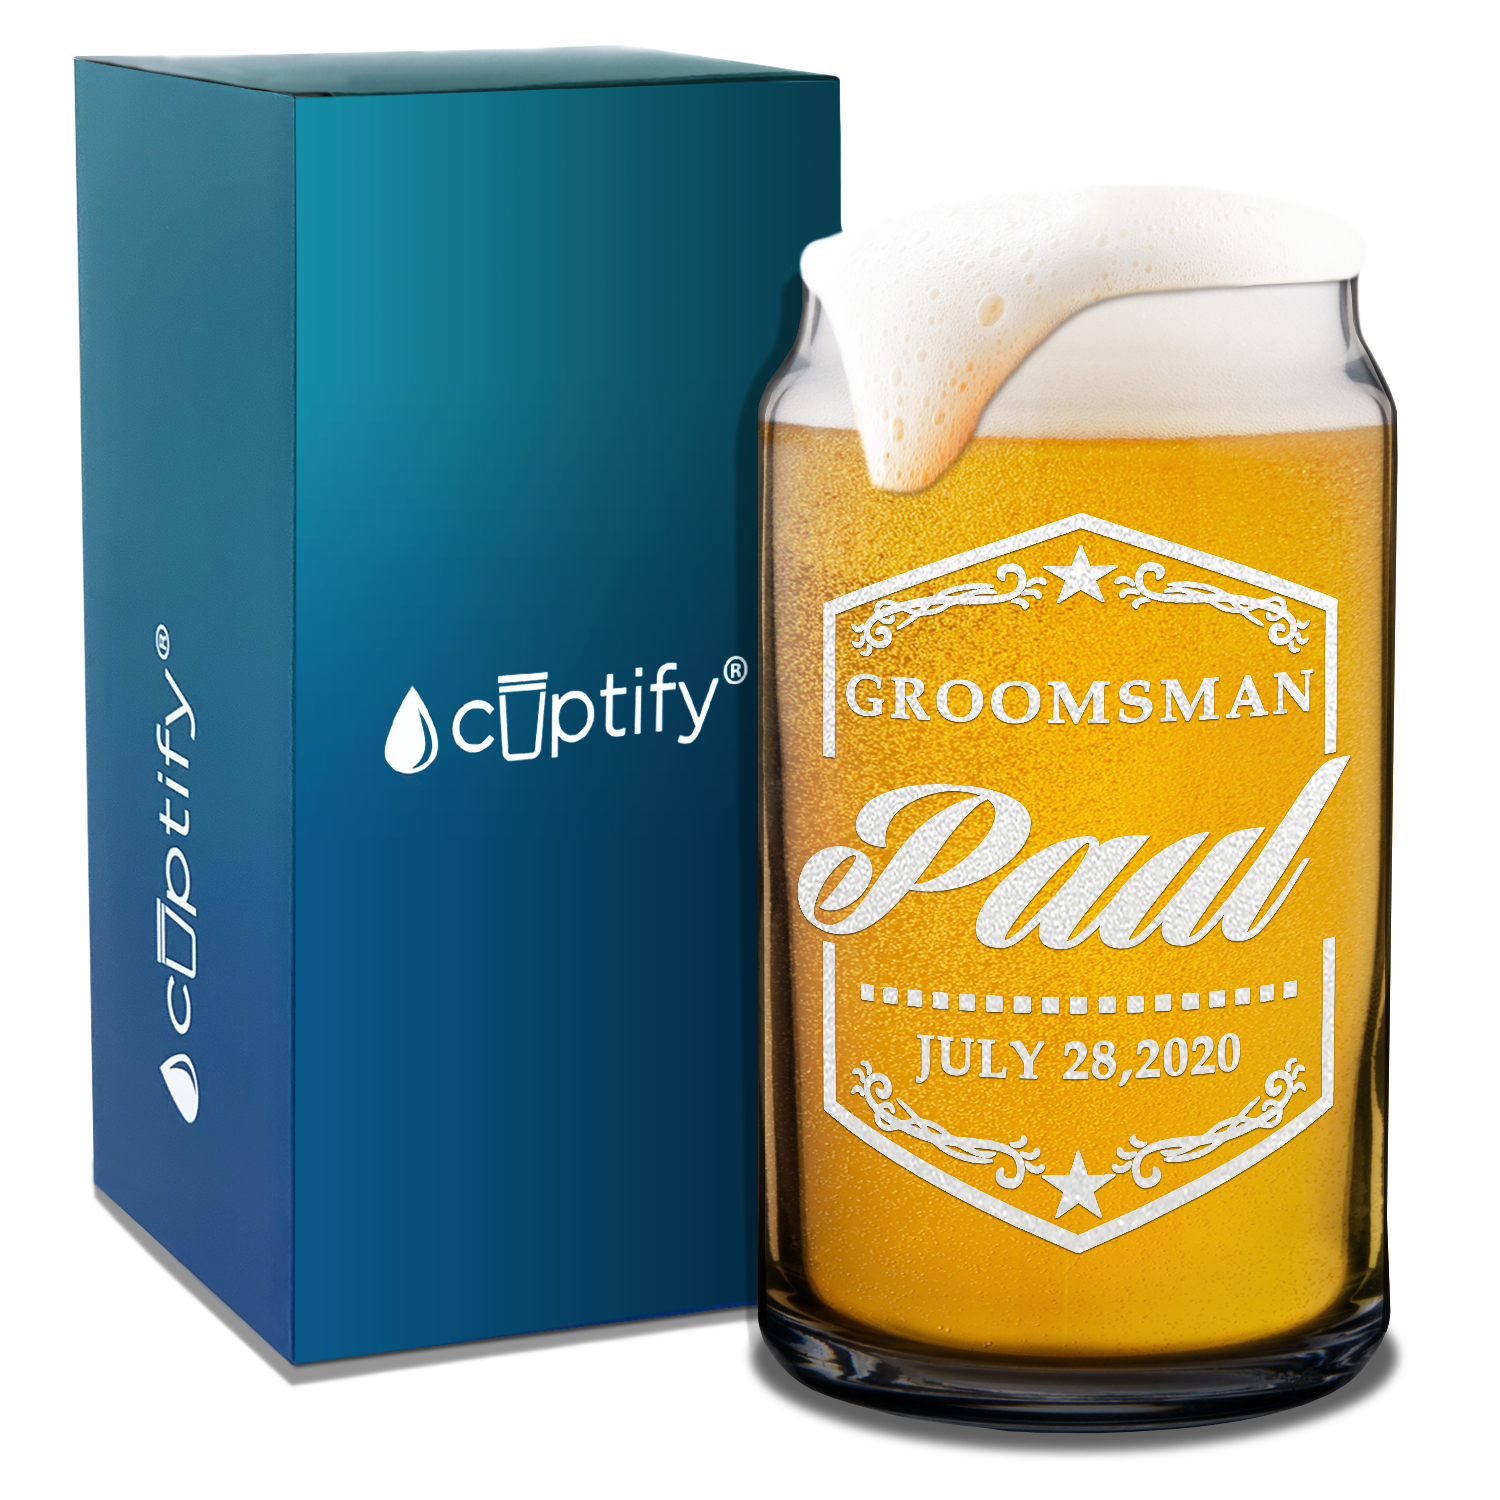  Personalized Groomsman Border Ornament Etched on 16 oz Beer Glass Can